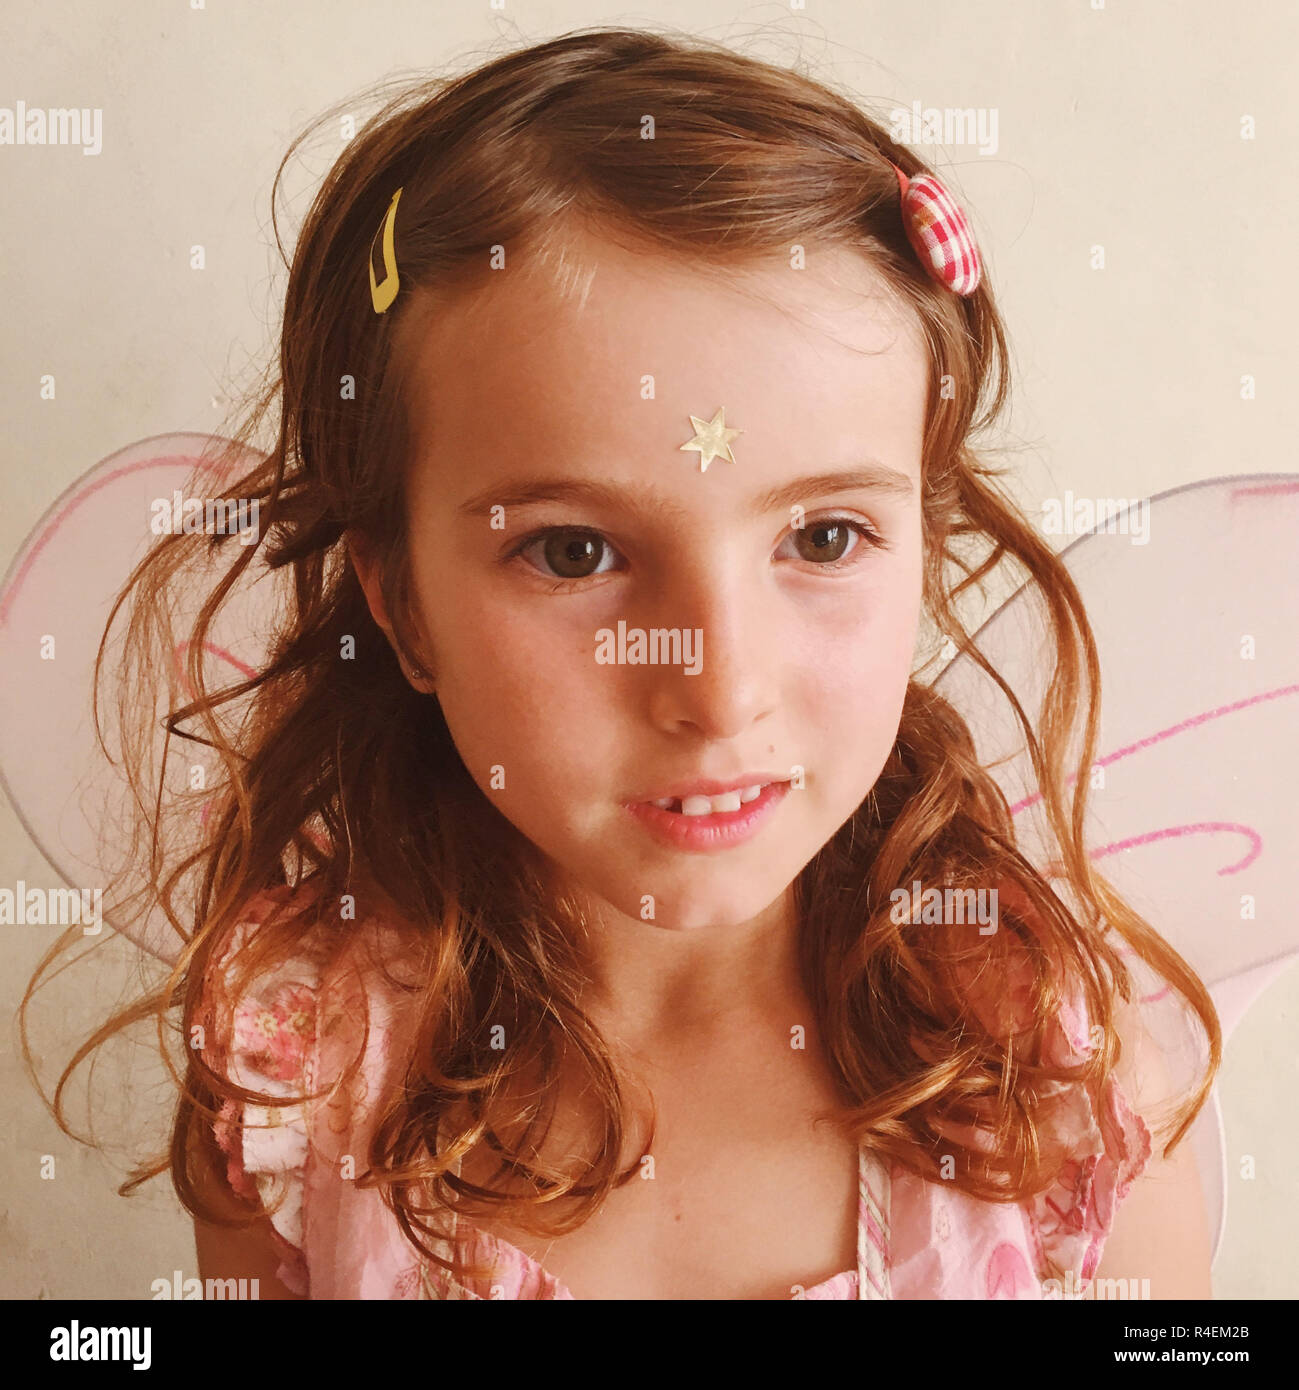 Portrait of a Girl wearing fairy wings Banque D'Images